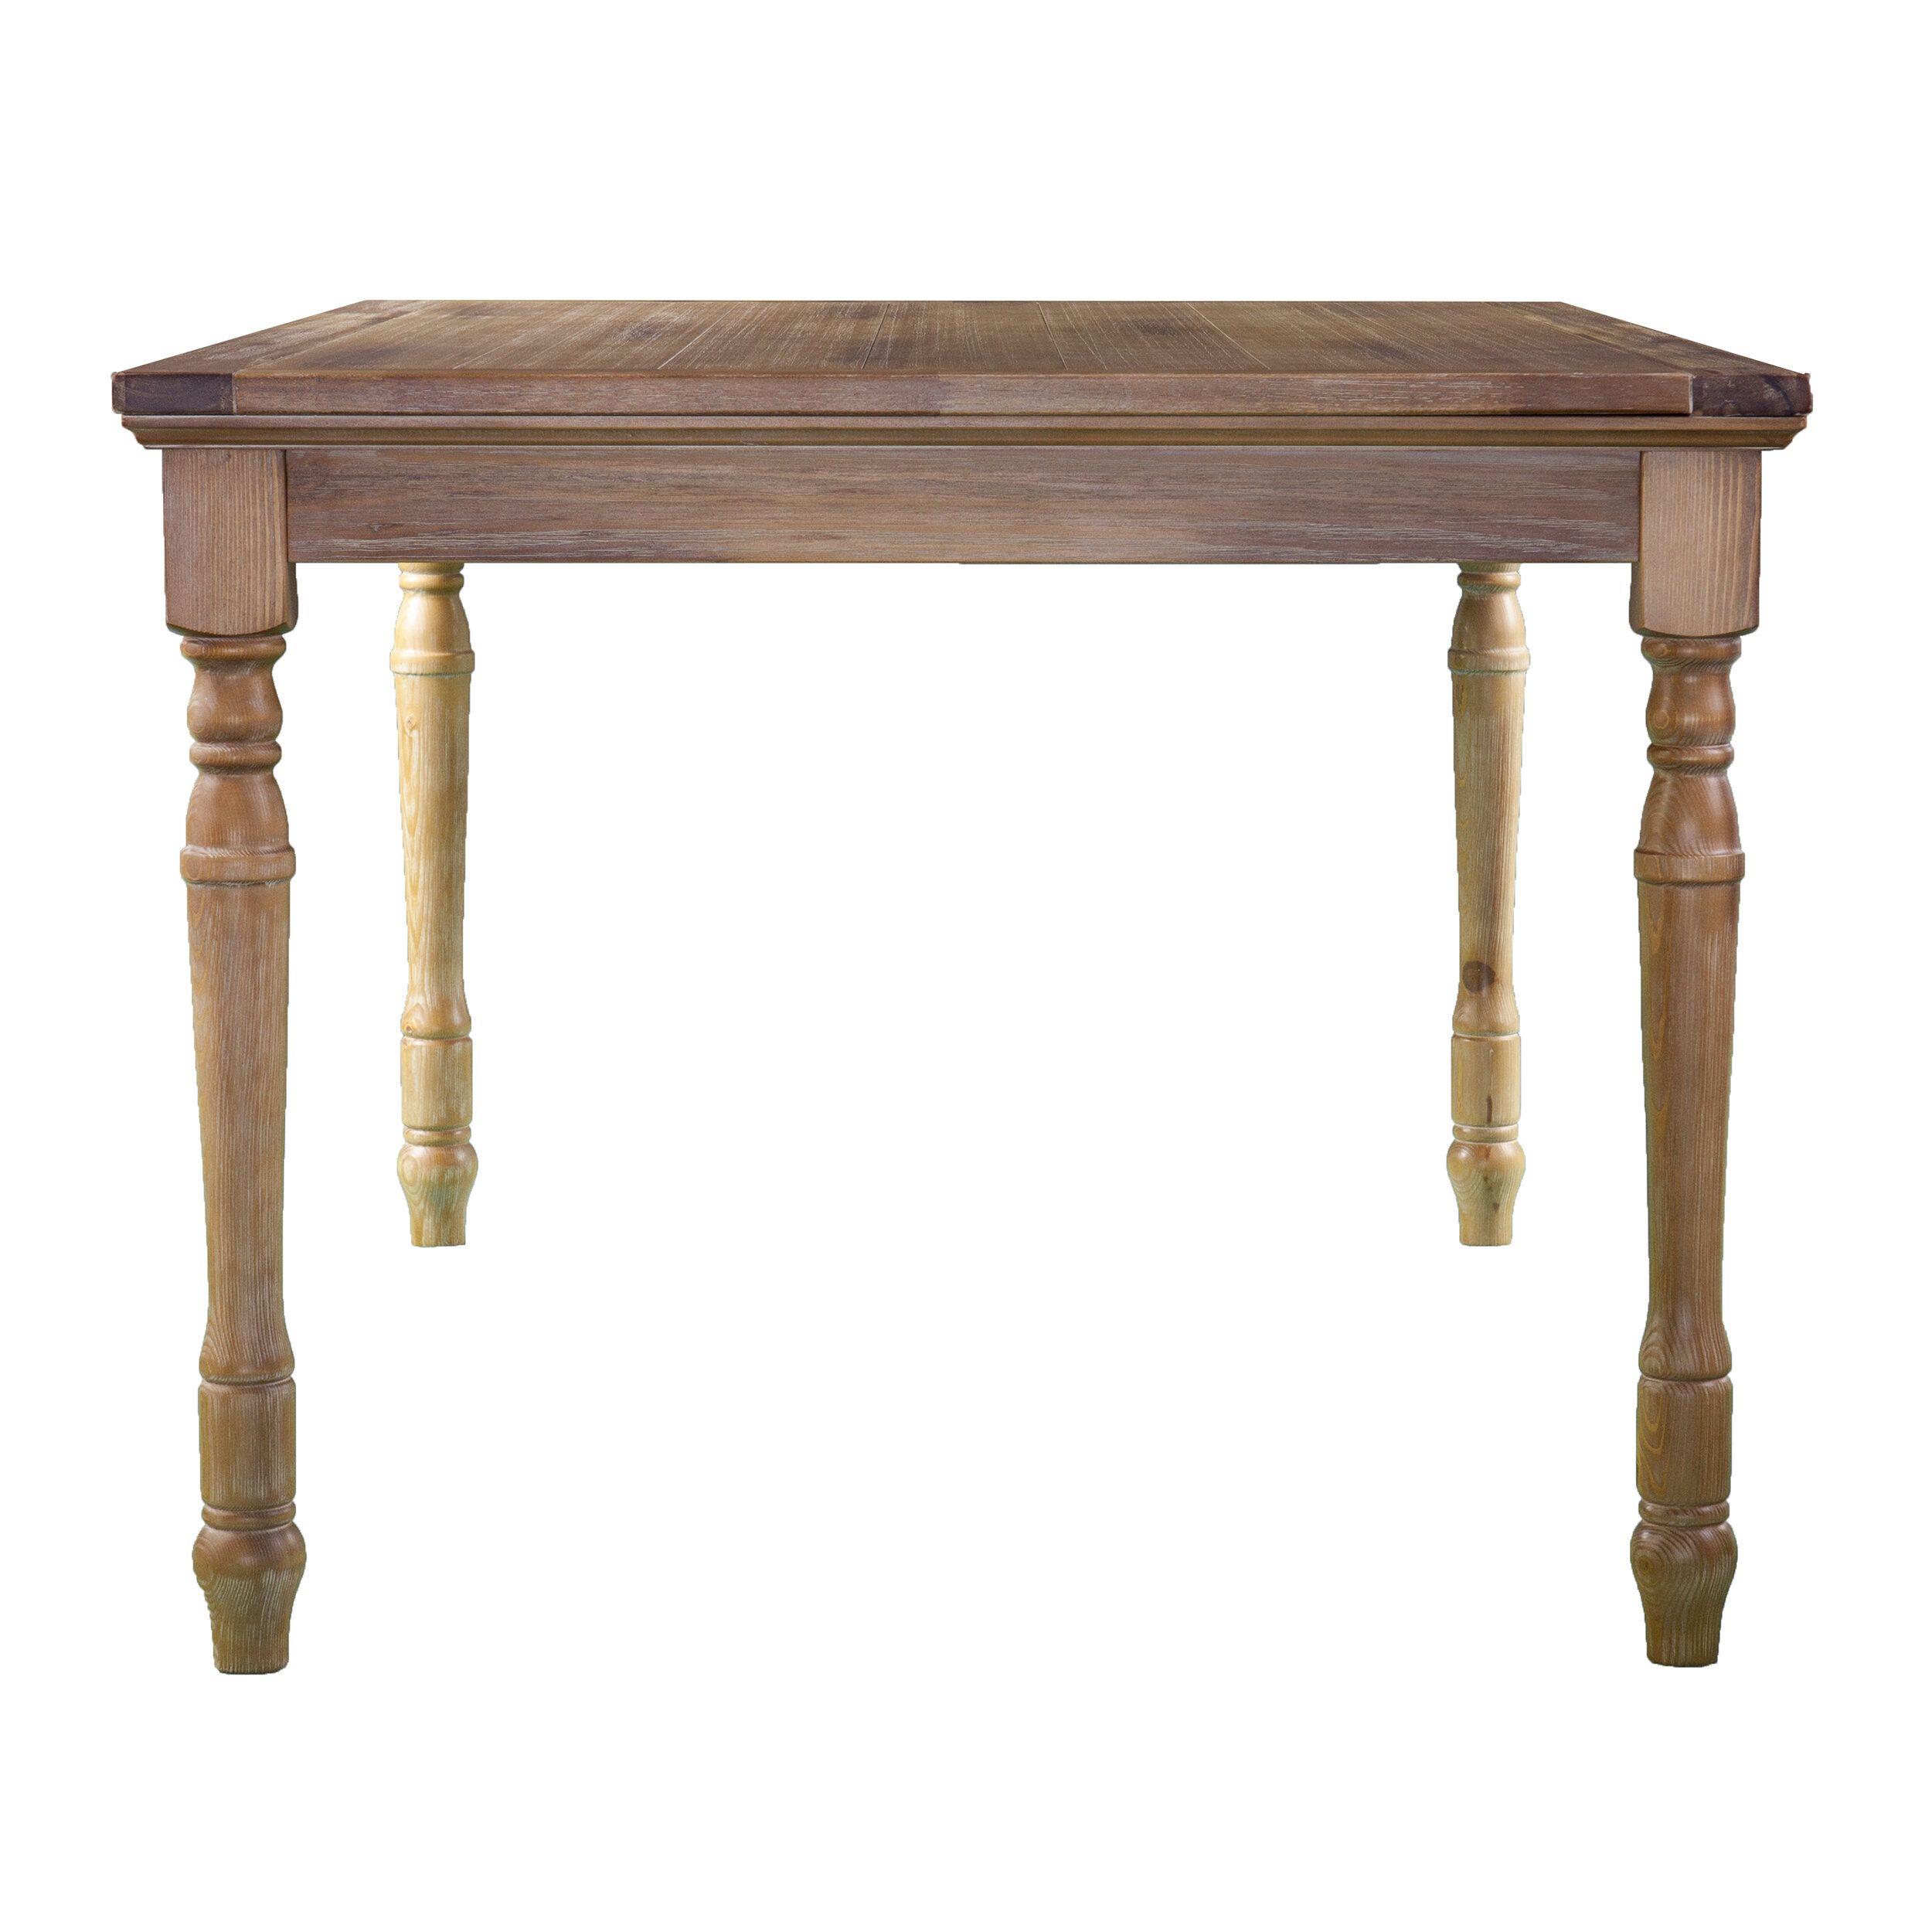 Charlton Home Io Farmhouse Dining Table & Reviews | Wayfair Within Most Recent Benchwright Bar Height Dining Tables (Photo 11 of 25)